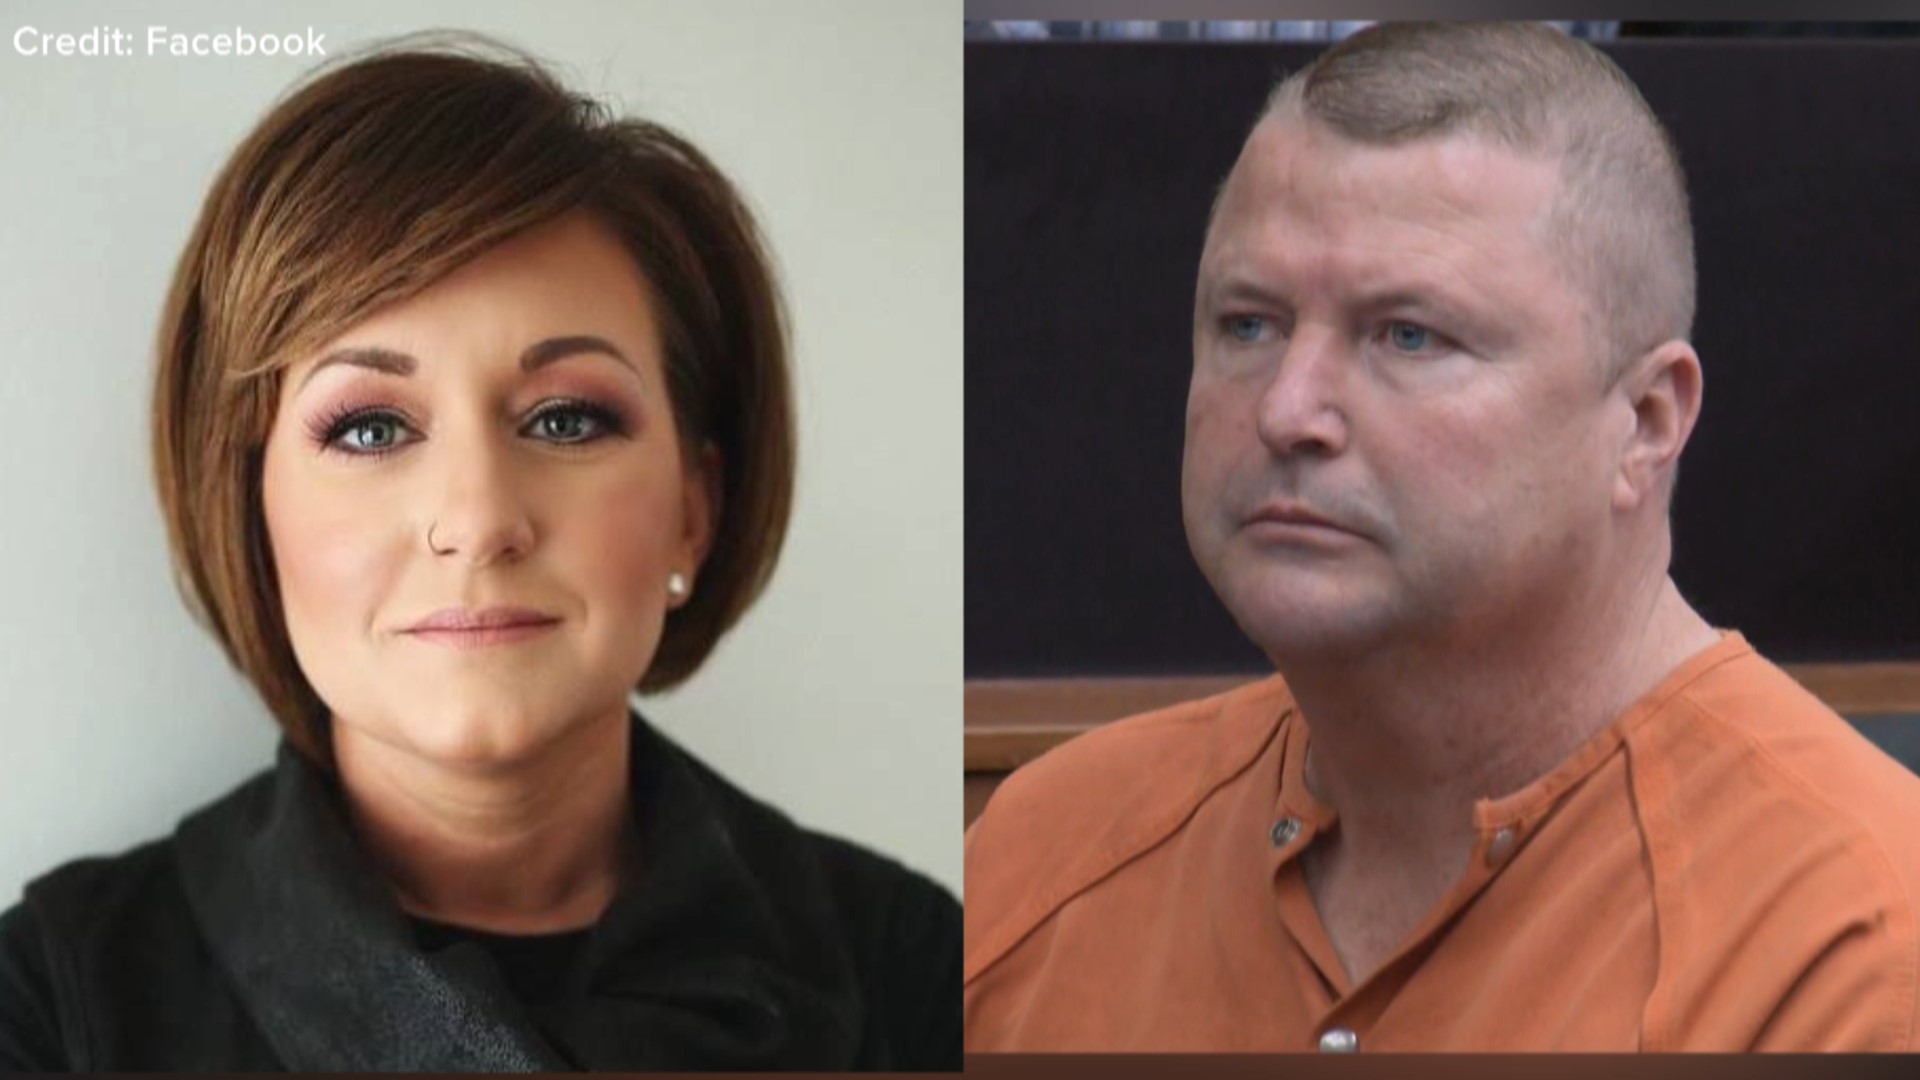 New court documents show Jamey Noel had a child with Brittney Ferree, paid child support out of the New Chapel EMS fund without declaring it on his taxes, and more.